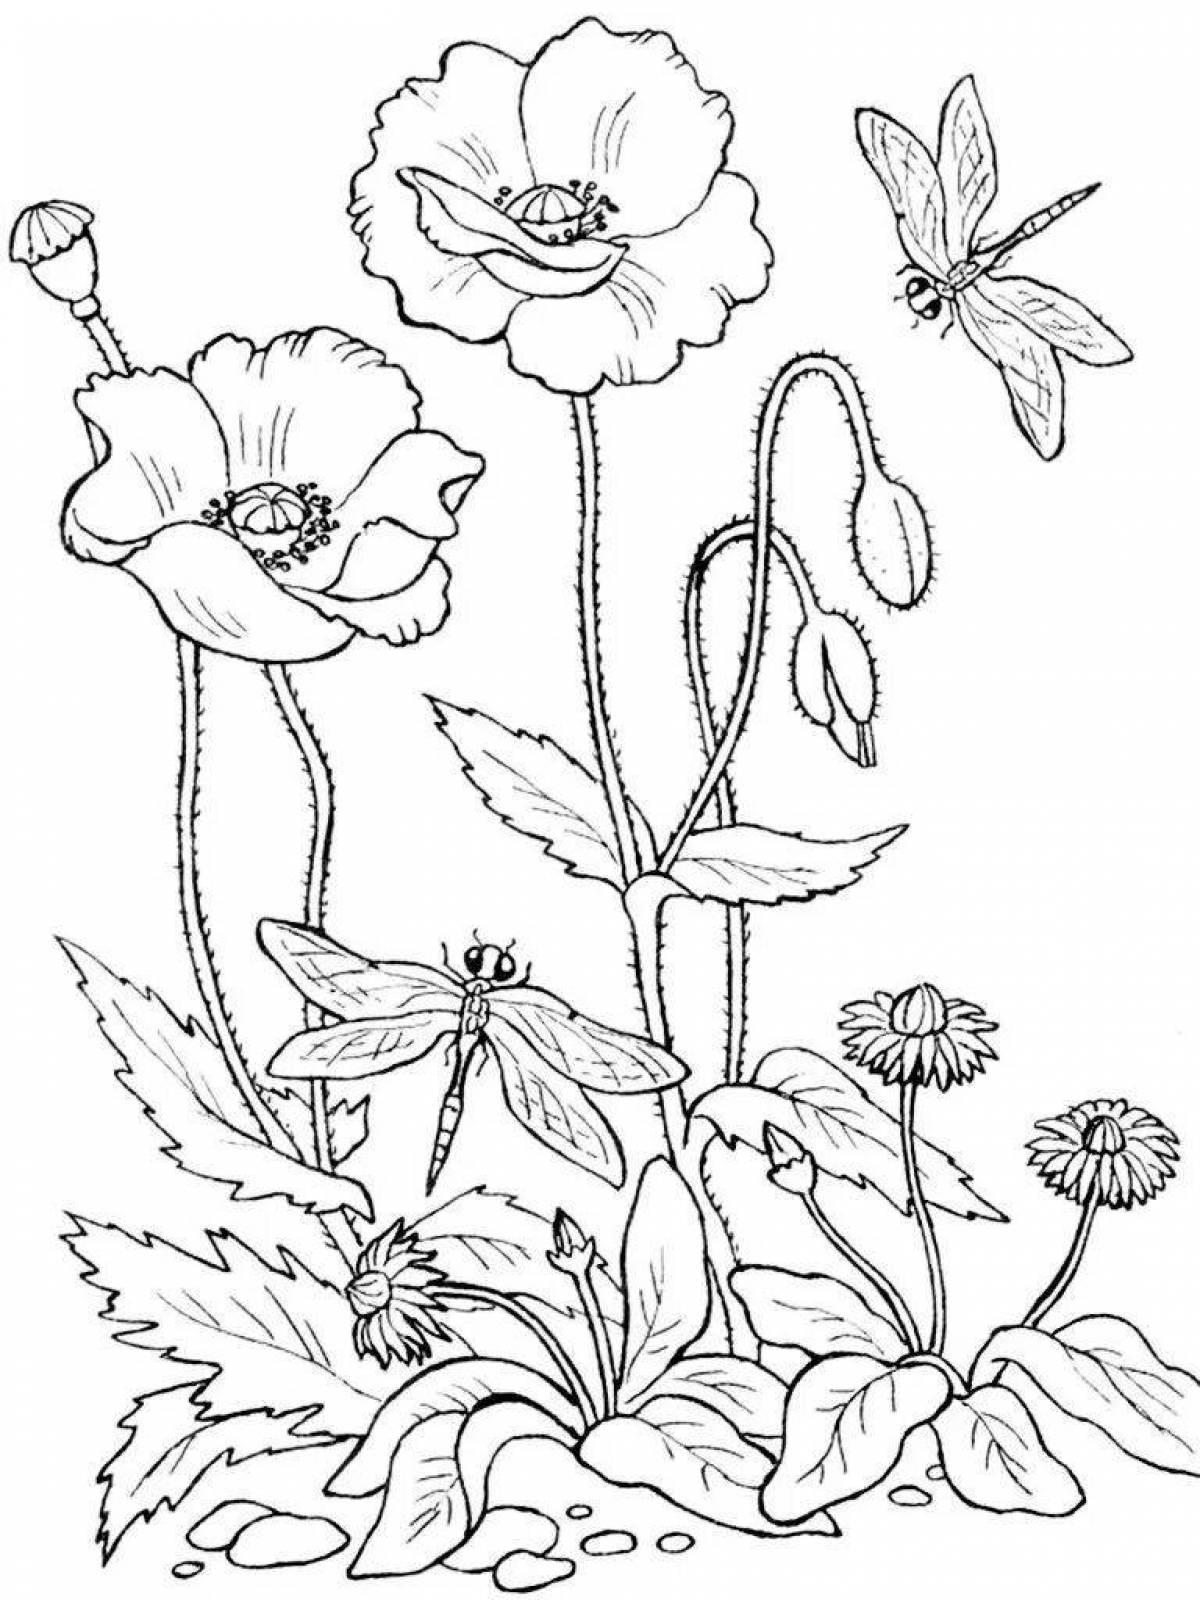 Adorable plant coloring book for kids